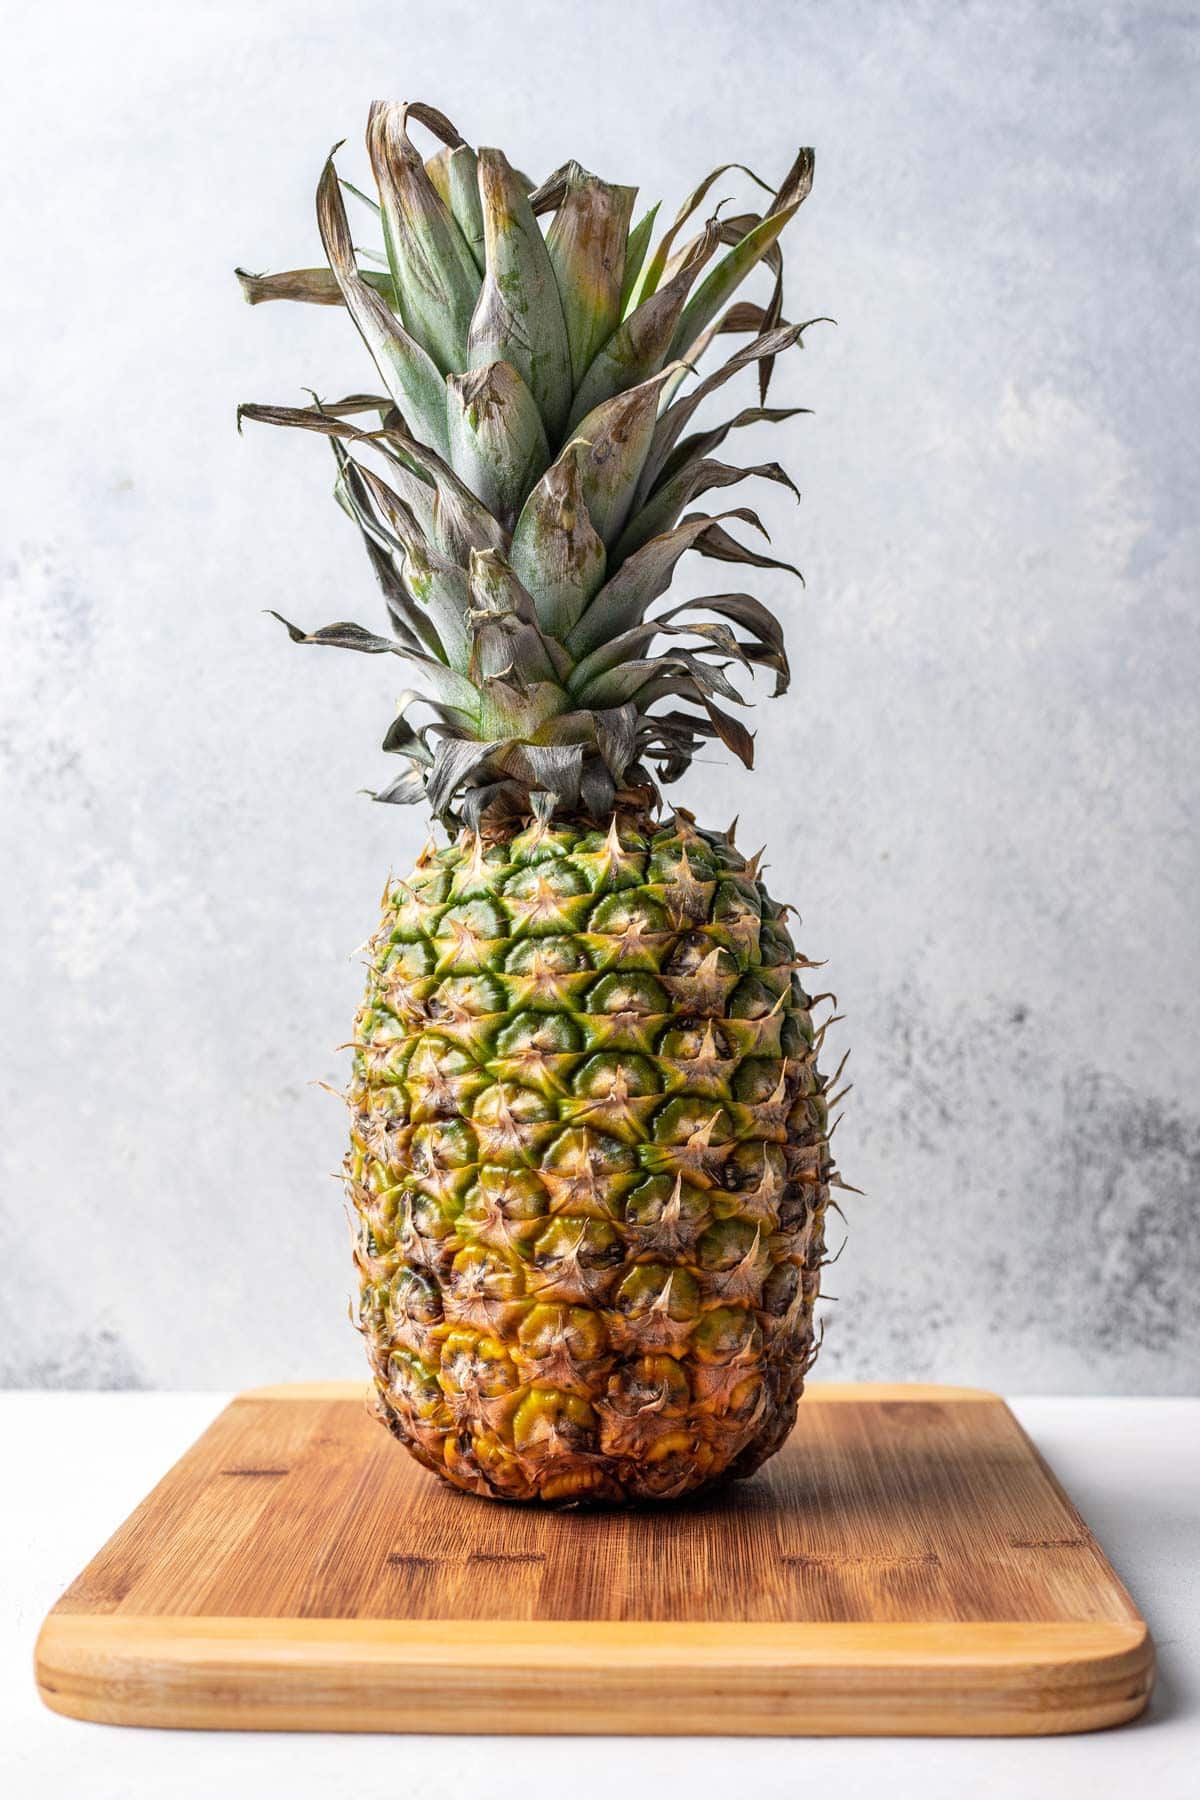 A whole fresh pineapple sitting on a wooden cutting board. 